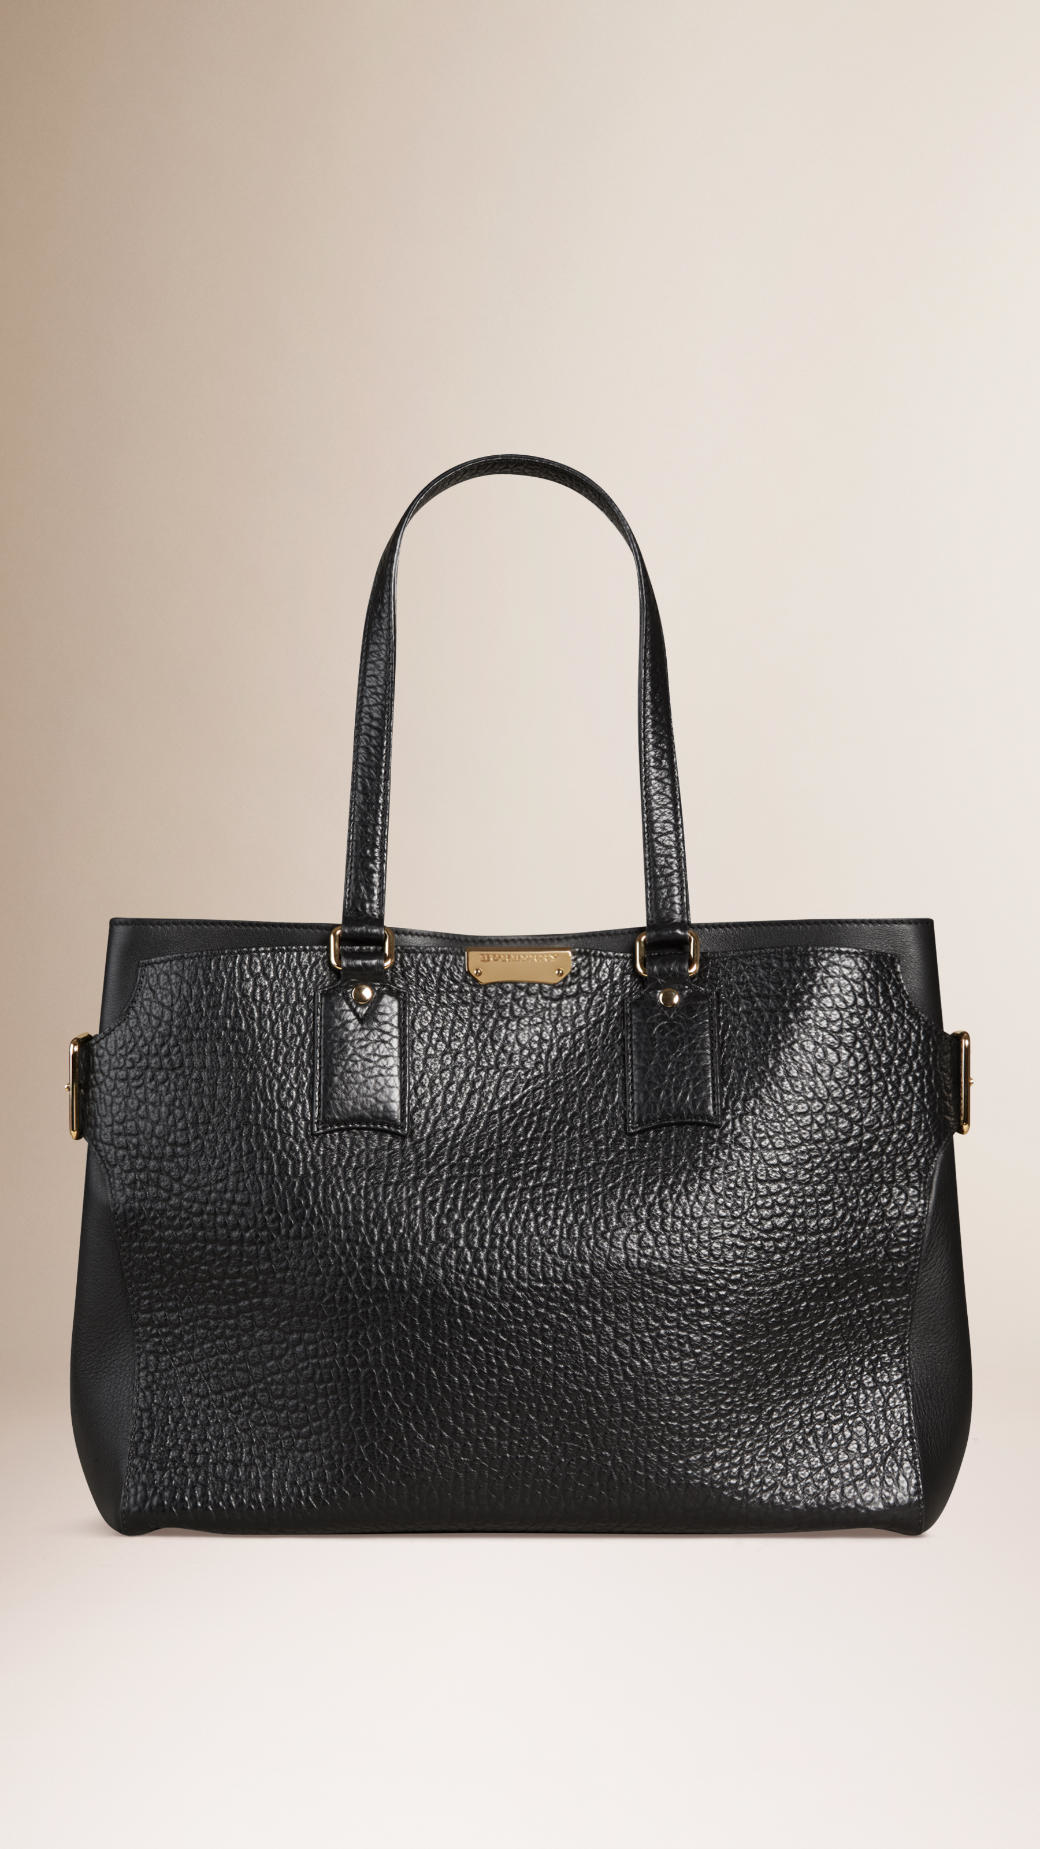 Burberry Large Signature Grained Leather Tote Bag in Black - Lyst